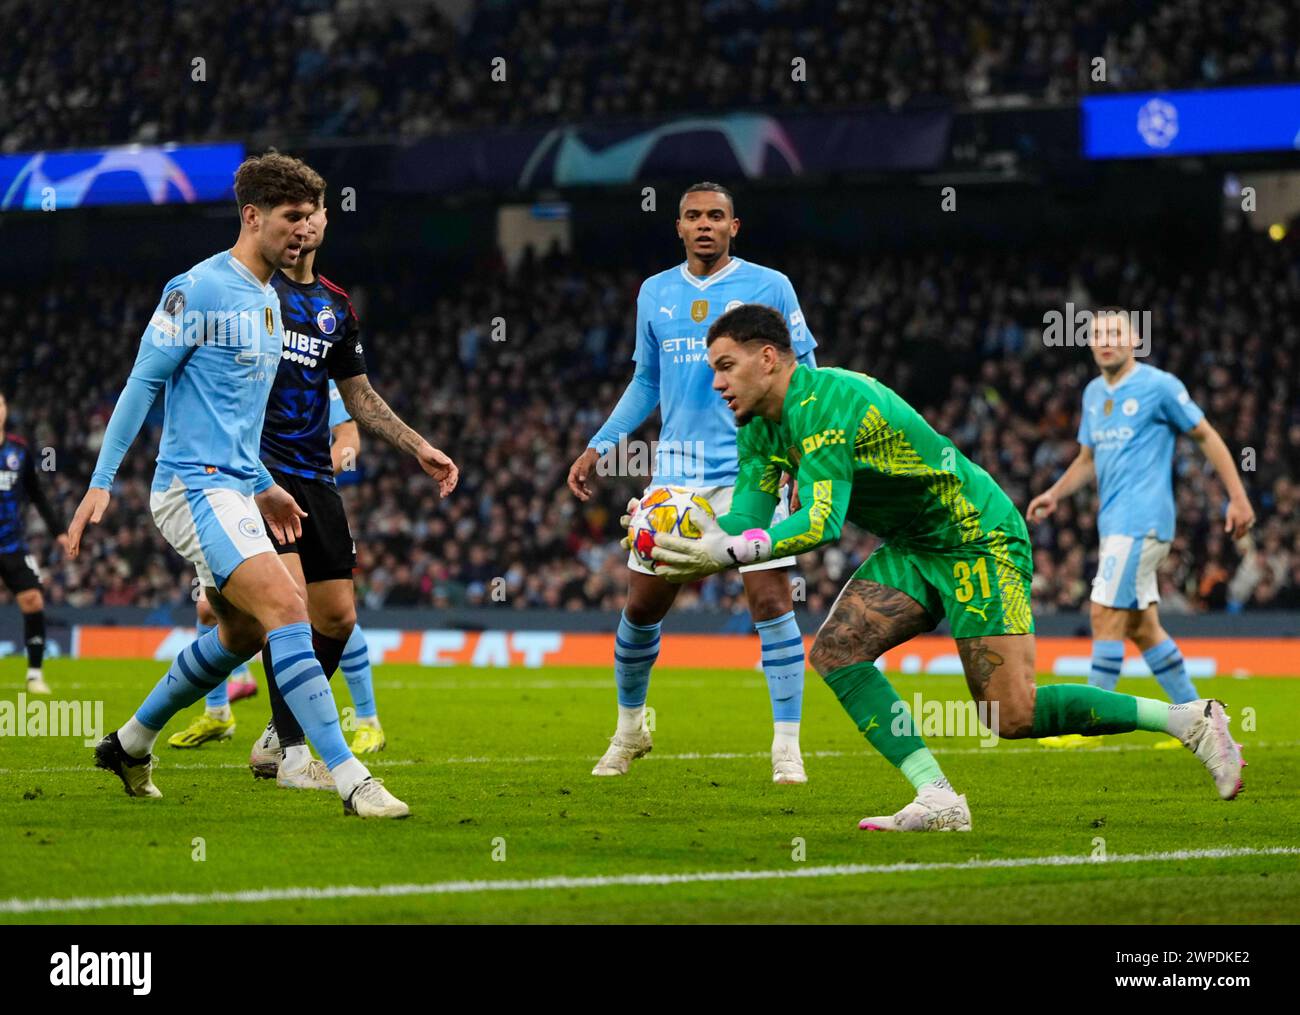 Etihad Stadium, Manchester, UK. 06th Mar, 2024. Ederson (Manchester City) controls the ball during a Champions League - Round of 16 game, Manchester City vs FC Copenhagen, at Etihad Stadium, Manchester, England. Kim Price/CSM/Alamy Live News Stock Photo